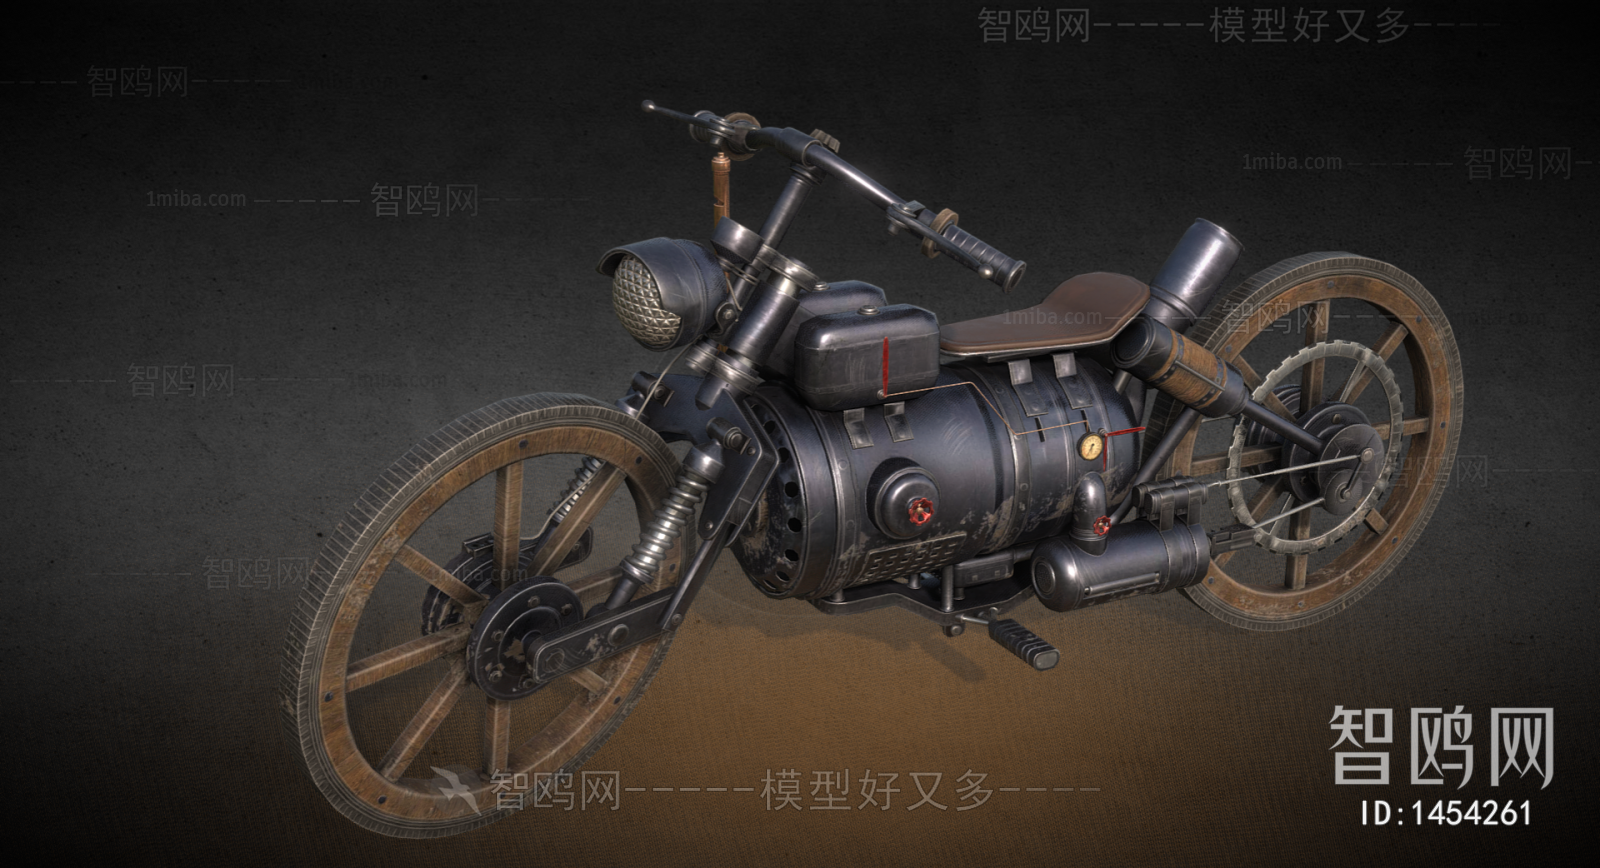 Industrial Style Motorcycle